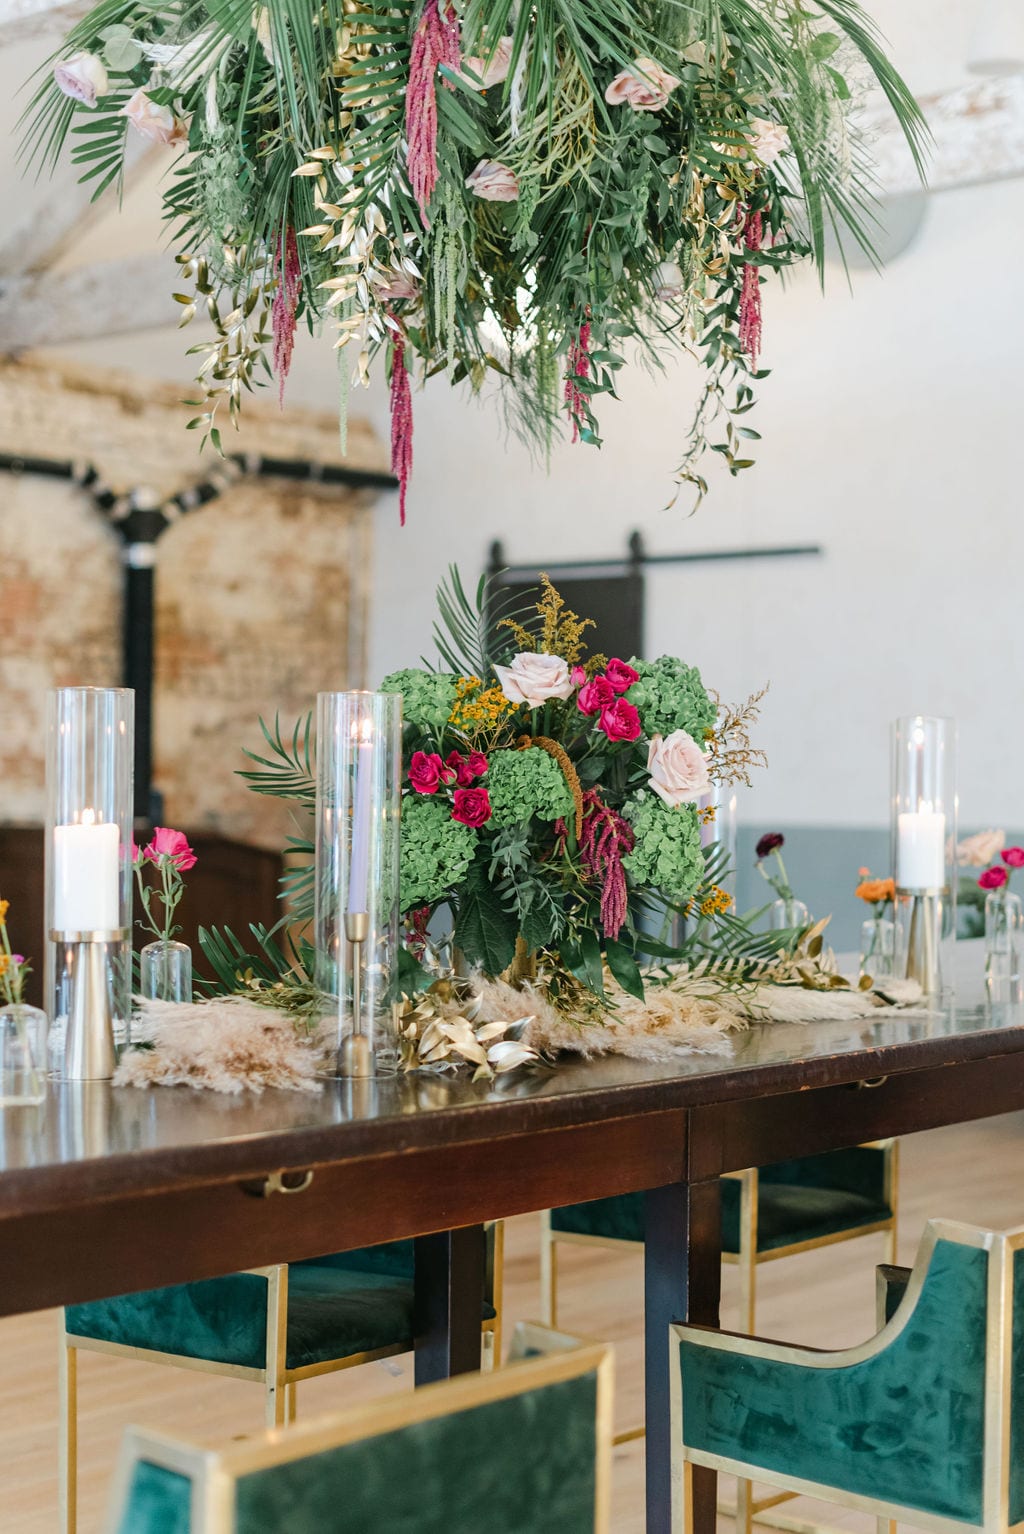 Charleston elopement reception design, with palms, emerald green bar stools, and candle accents.